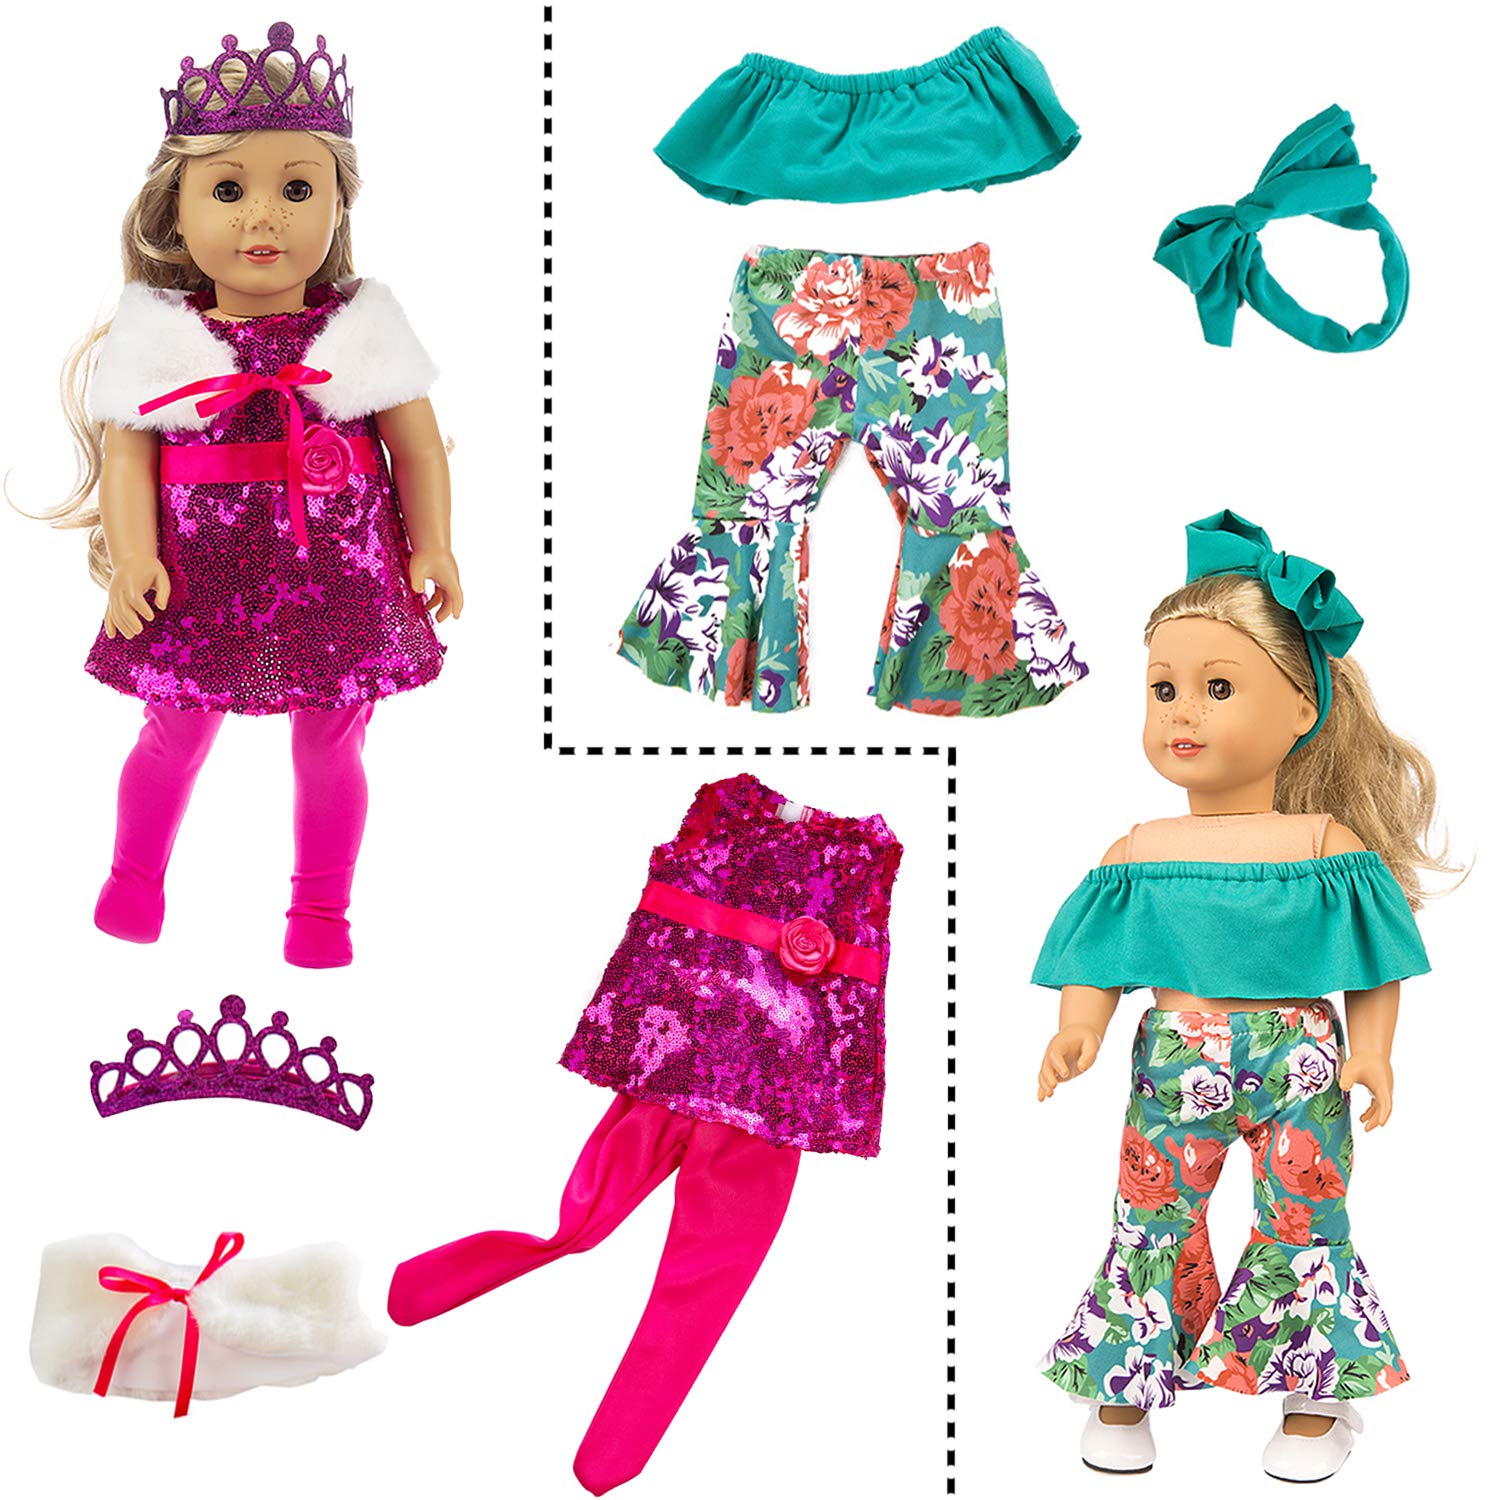 ZITA ELEMENT 24 Pcs 18 Inch Girl Doll Clothes and Accessories - Doll Clothing Outfits Dress Swimsuits Tights for 18 Inch Dolls Christmas Birthday Gift